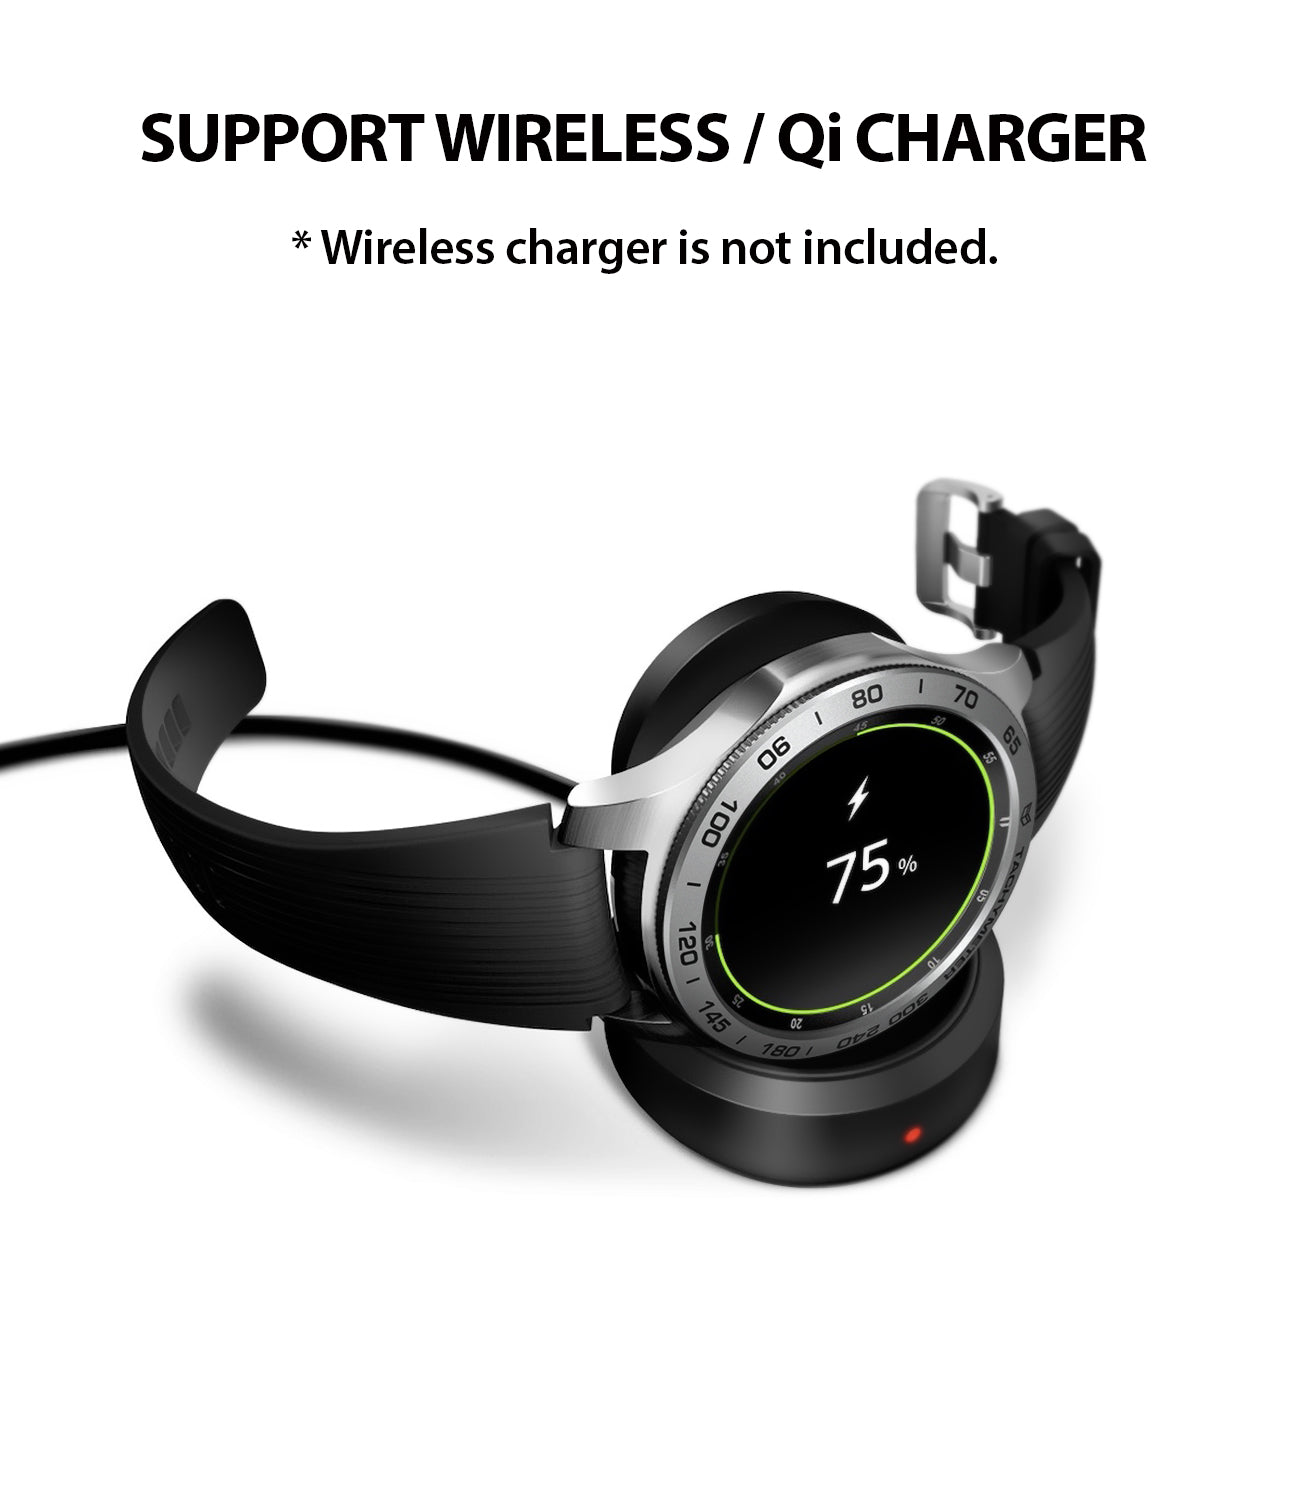 ringke bezels styling supports wireless, qi charging with the cover on